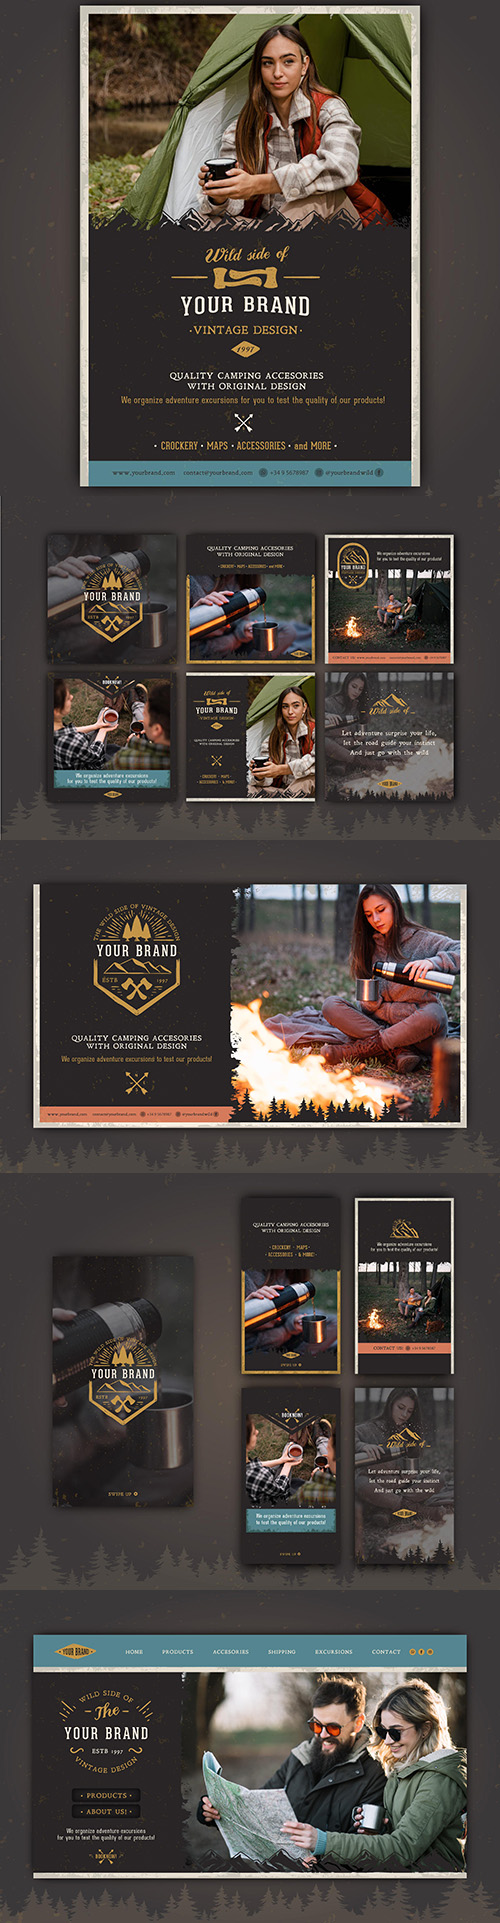 Wildlife stories messages on instagram and main page design template